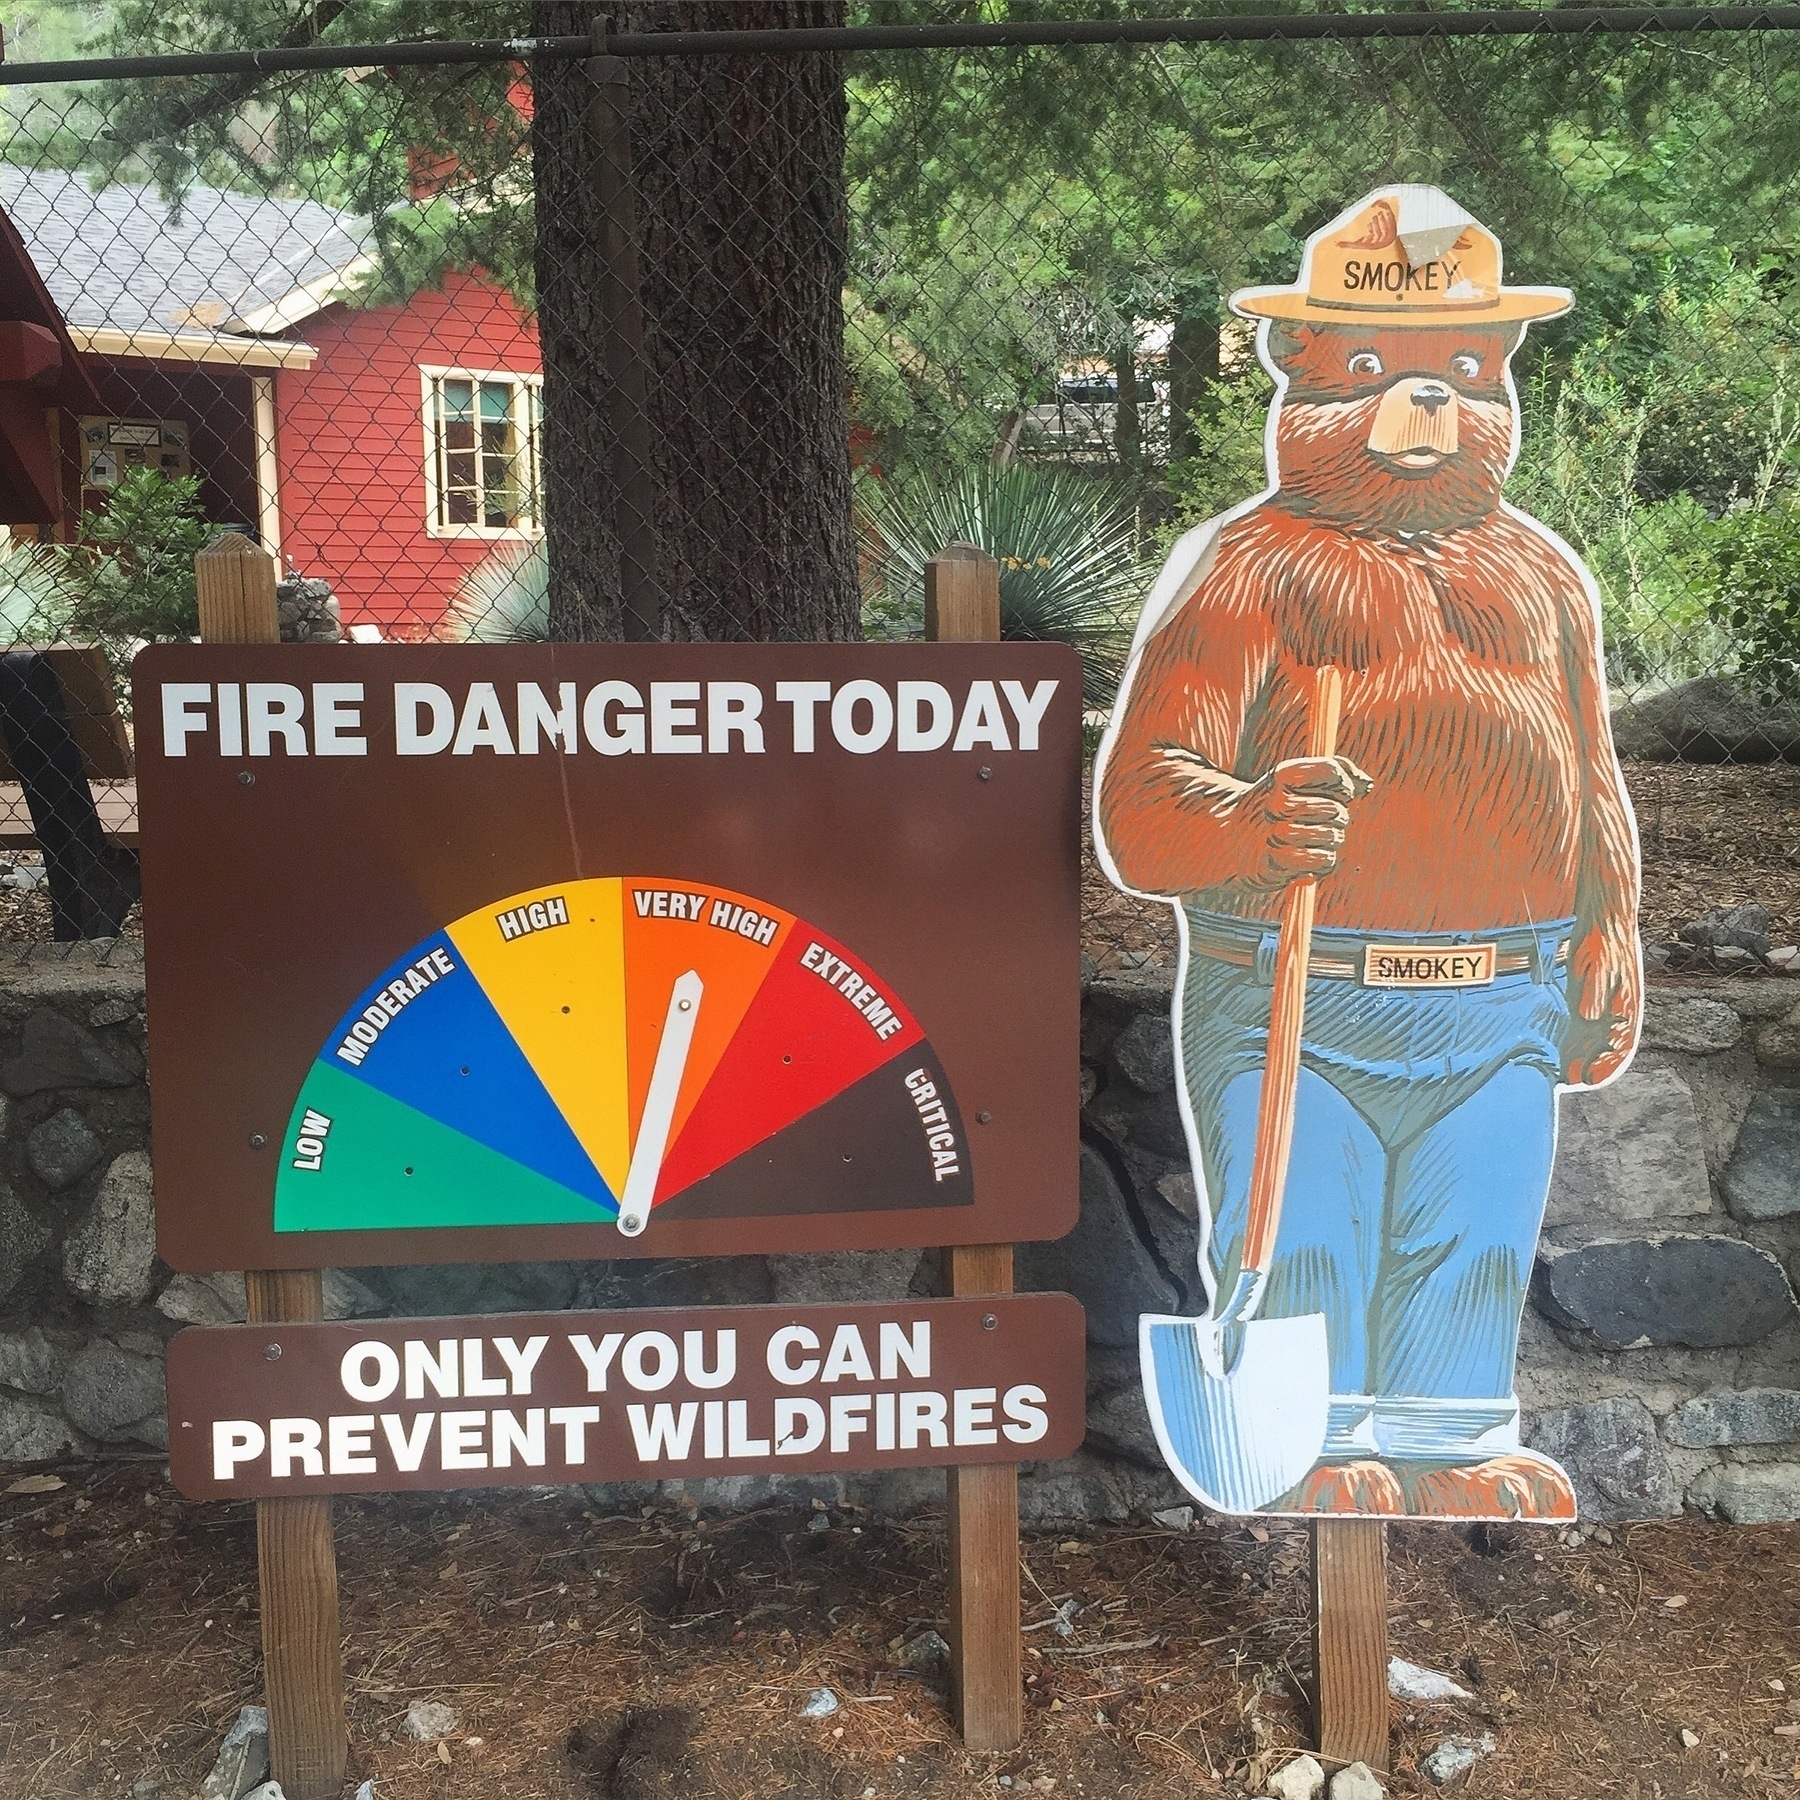 A Smokey The Bear cartoon sign in the woods, with a fire danger rating of 'Very High' and a reminder that 'Only You Can Prevent Wildfires'.